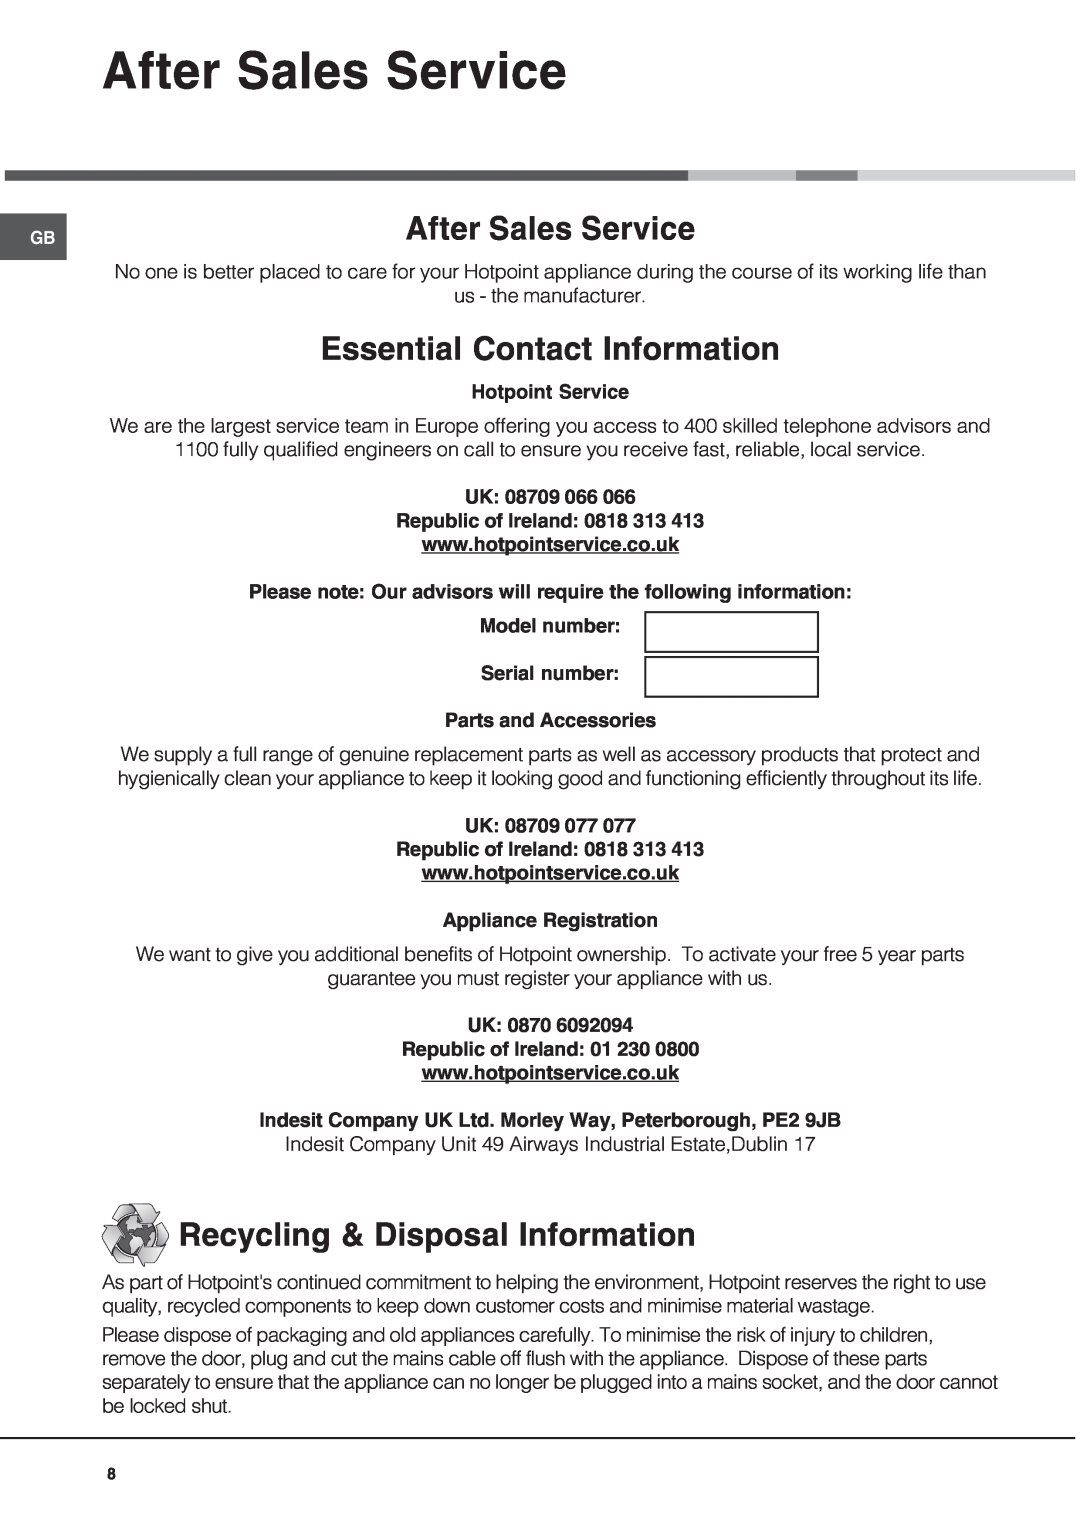 Hotpoint HWD24X operating instructions After Sales Service, Essential Contact Information, Recycling & Disposal Information 